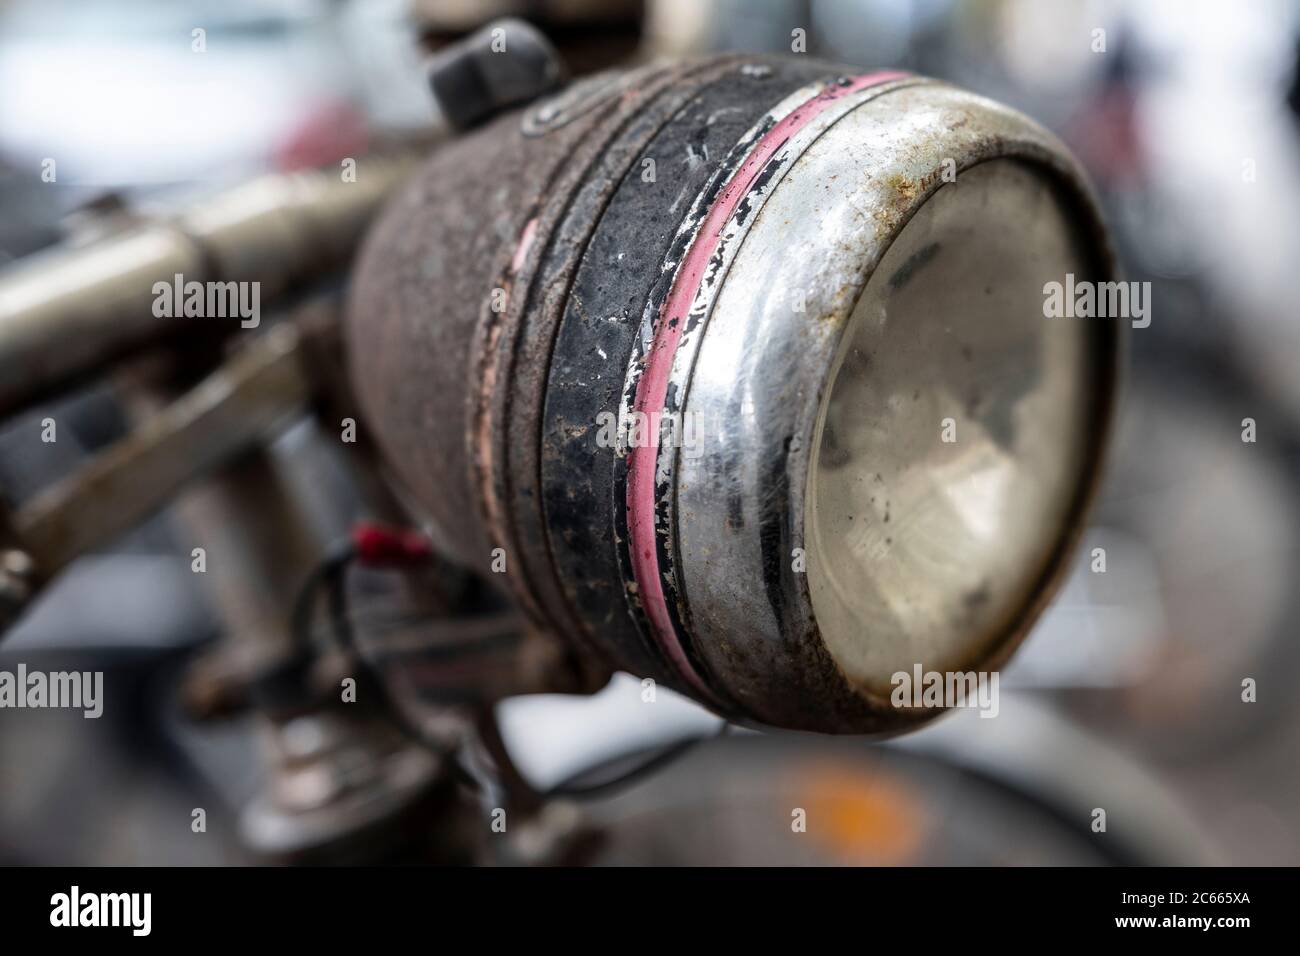 Old bicycle with lamp, close-up, detail Stock Photo